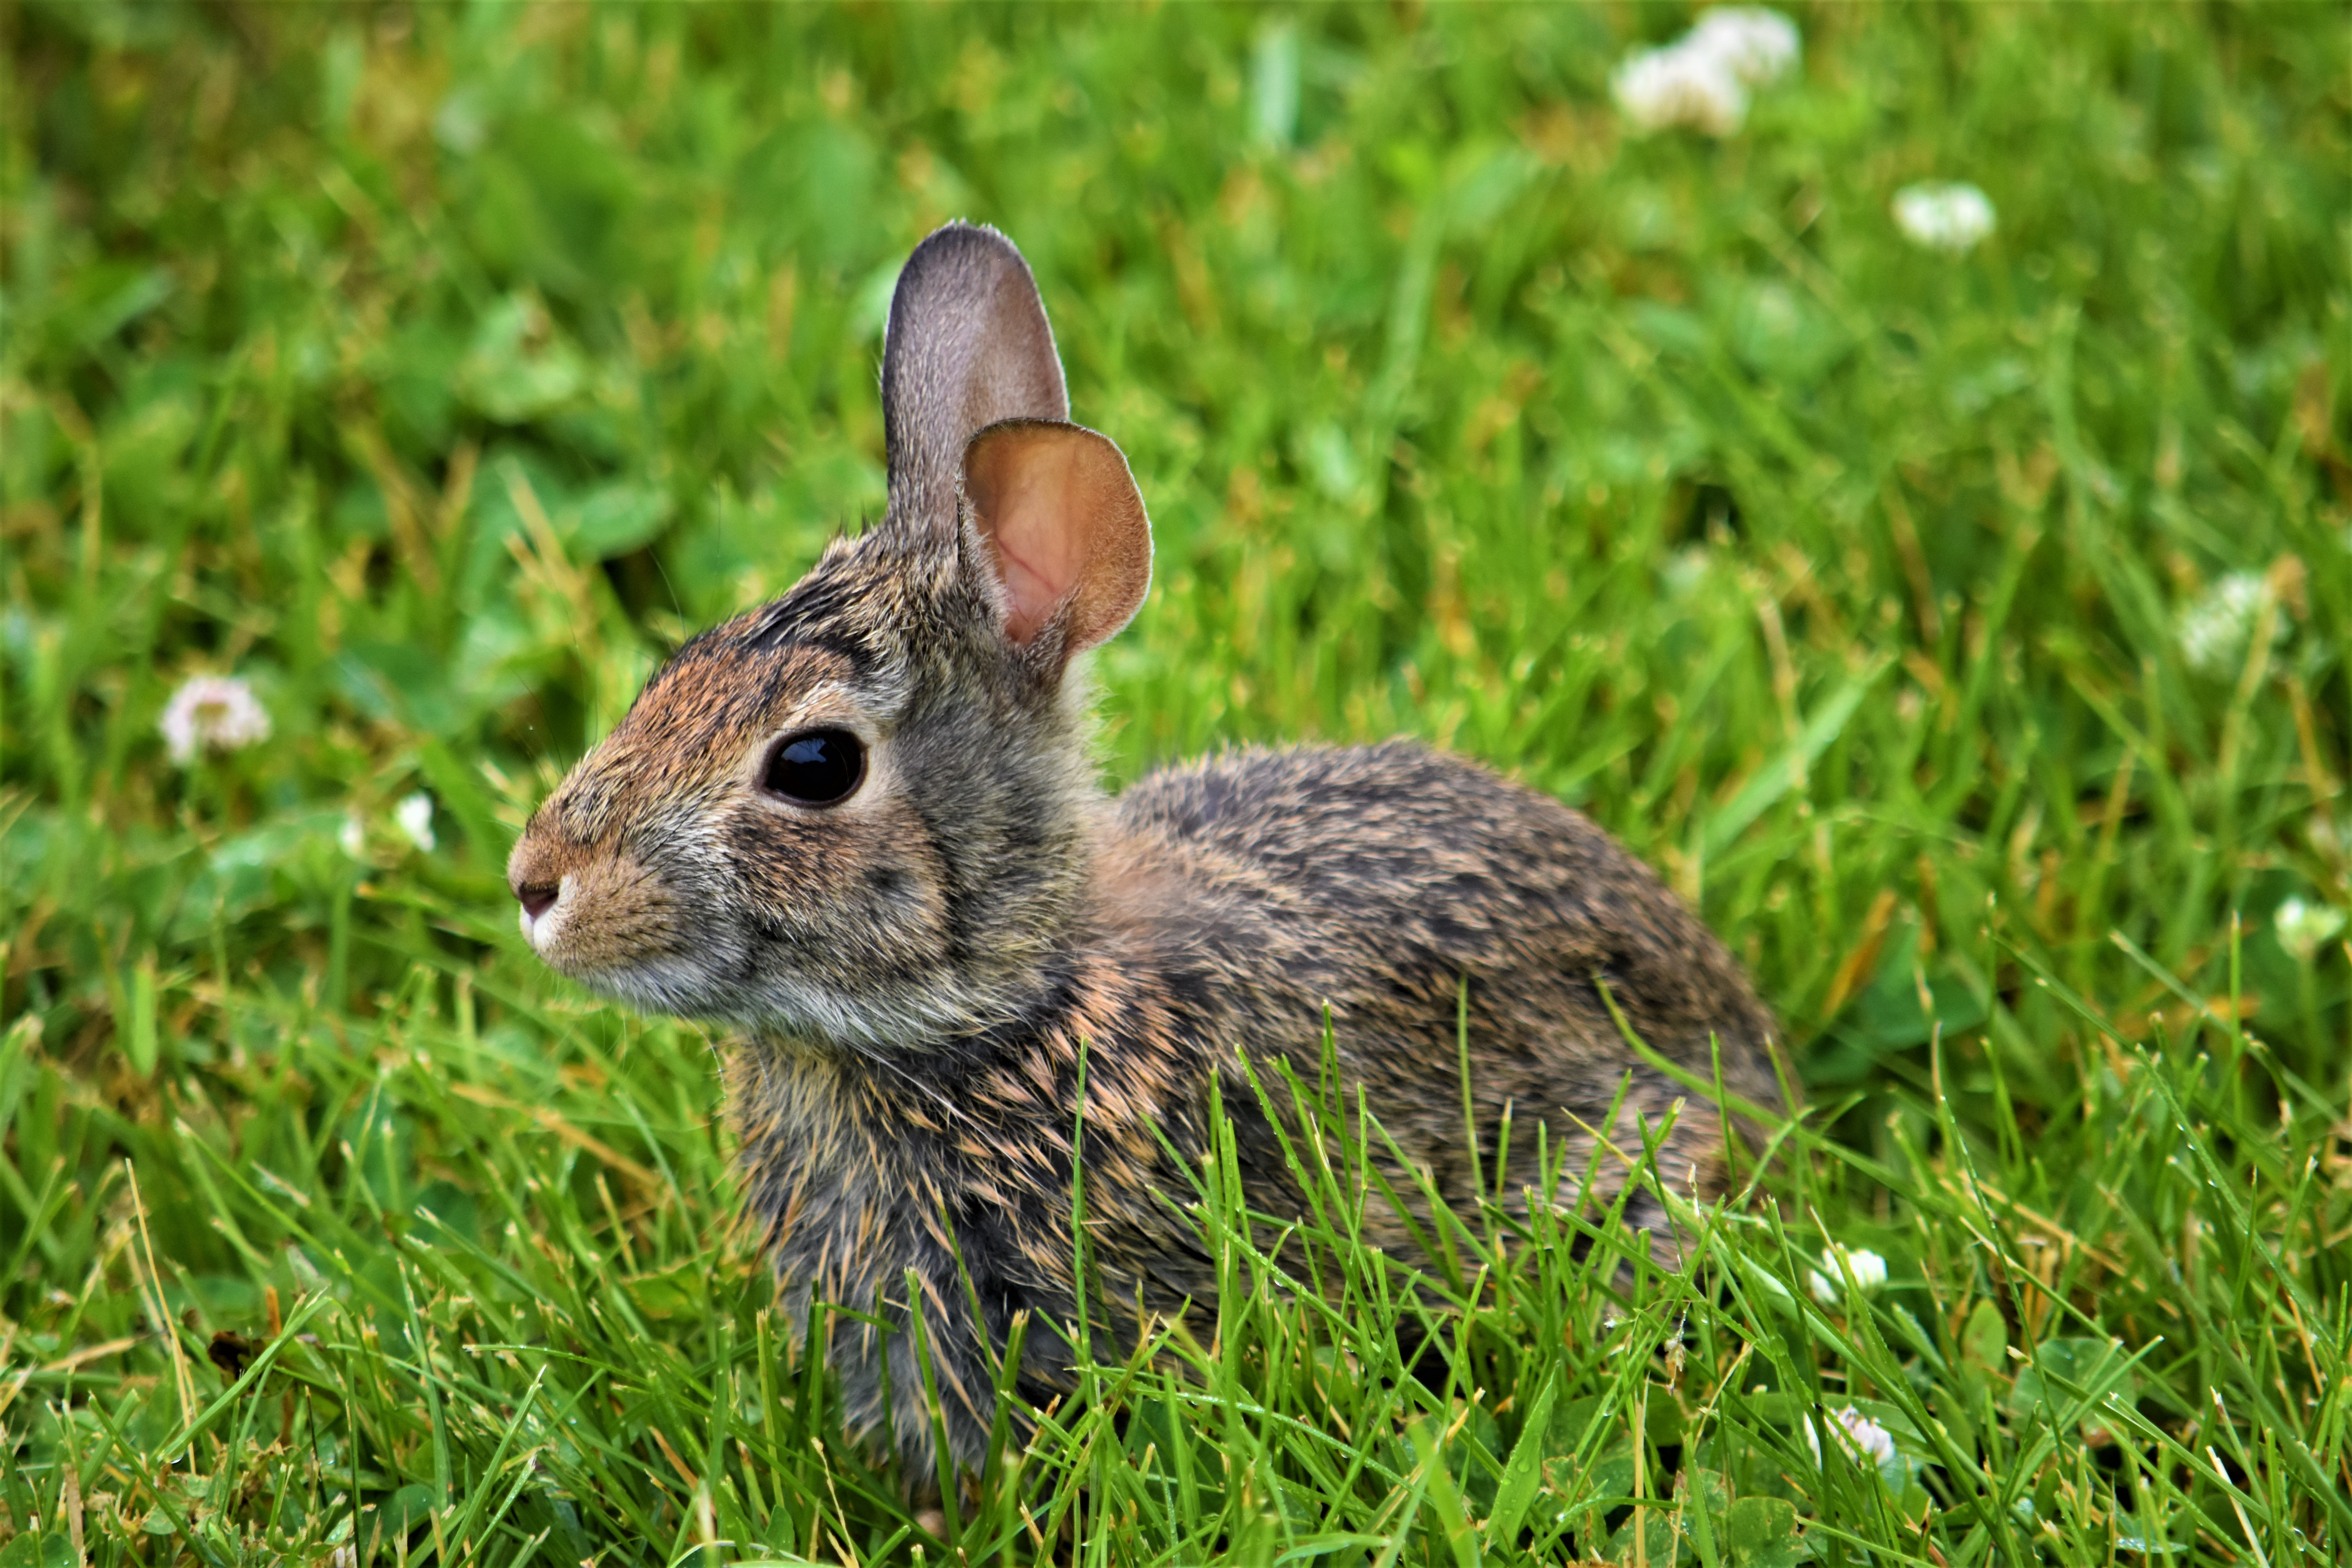 An Eastern Cottontail sits in the grass.